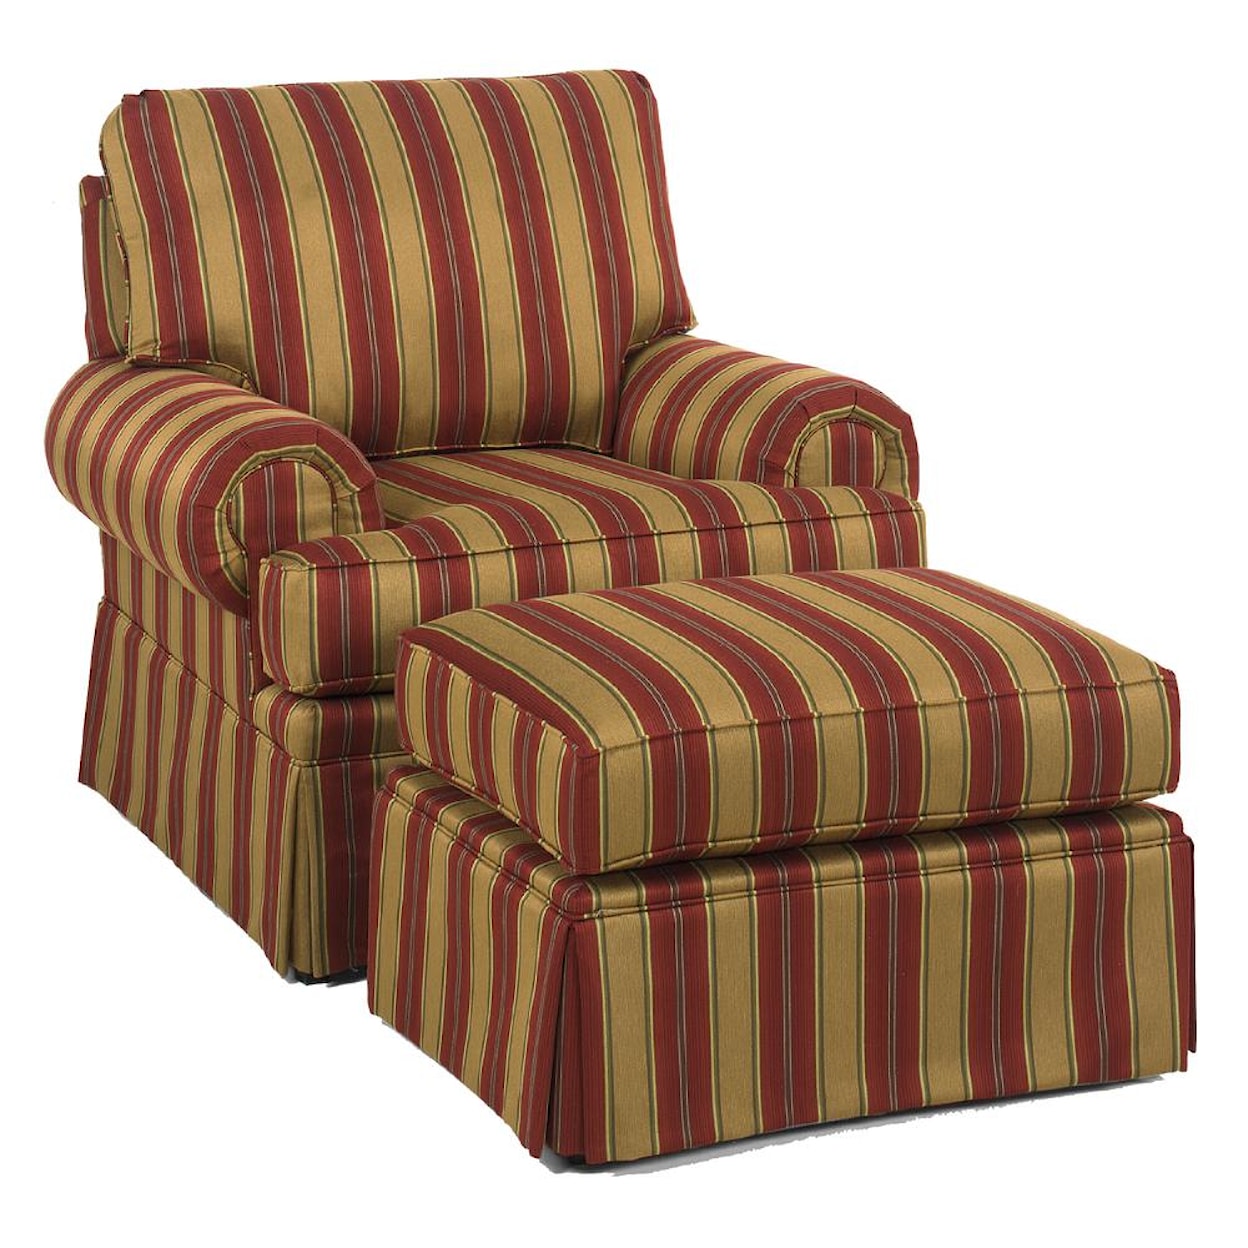 Temple Furniture Winston Upholstered Chair with Skirt